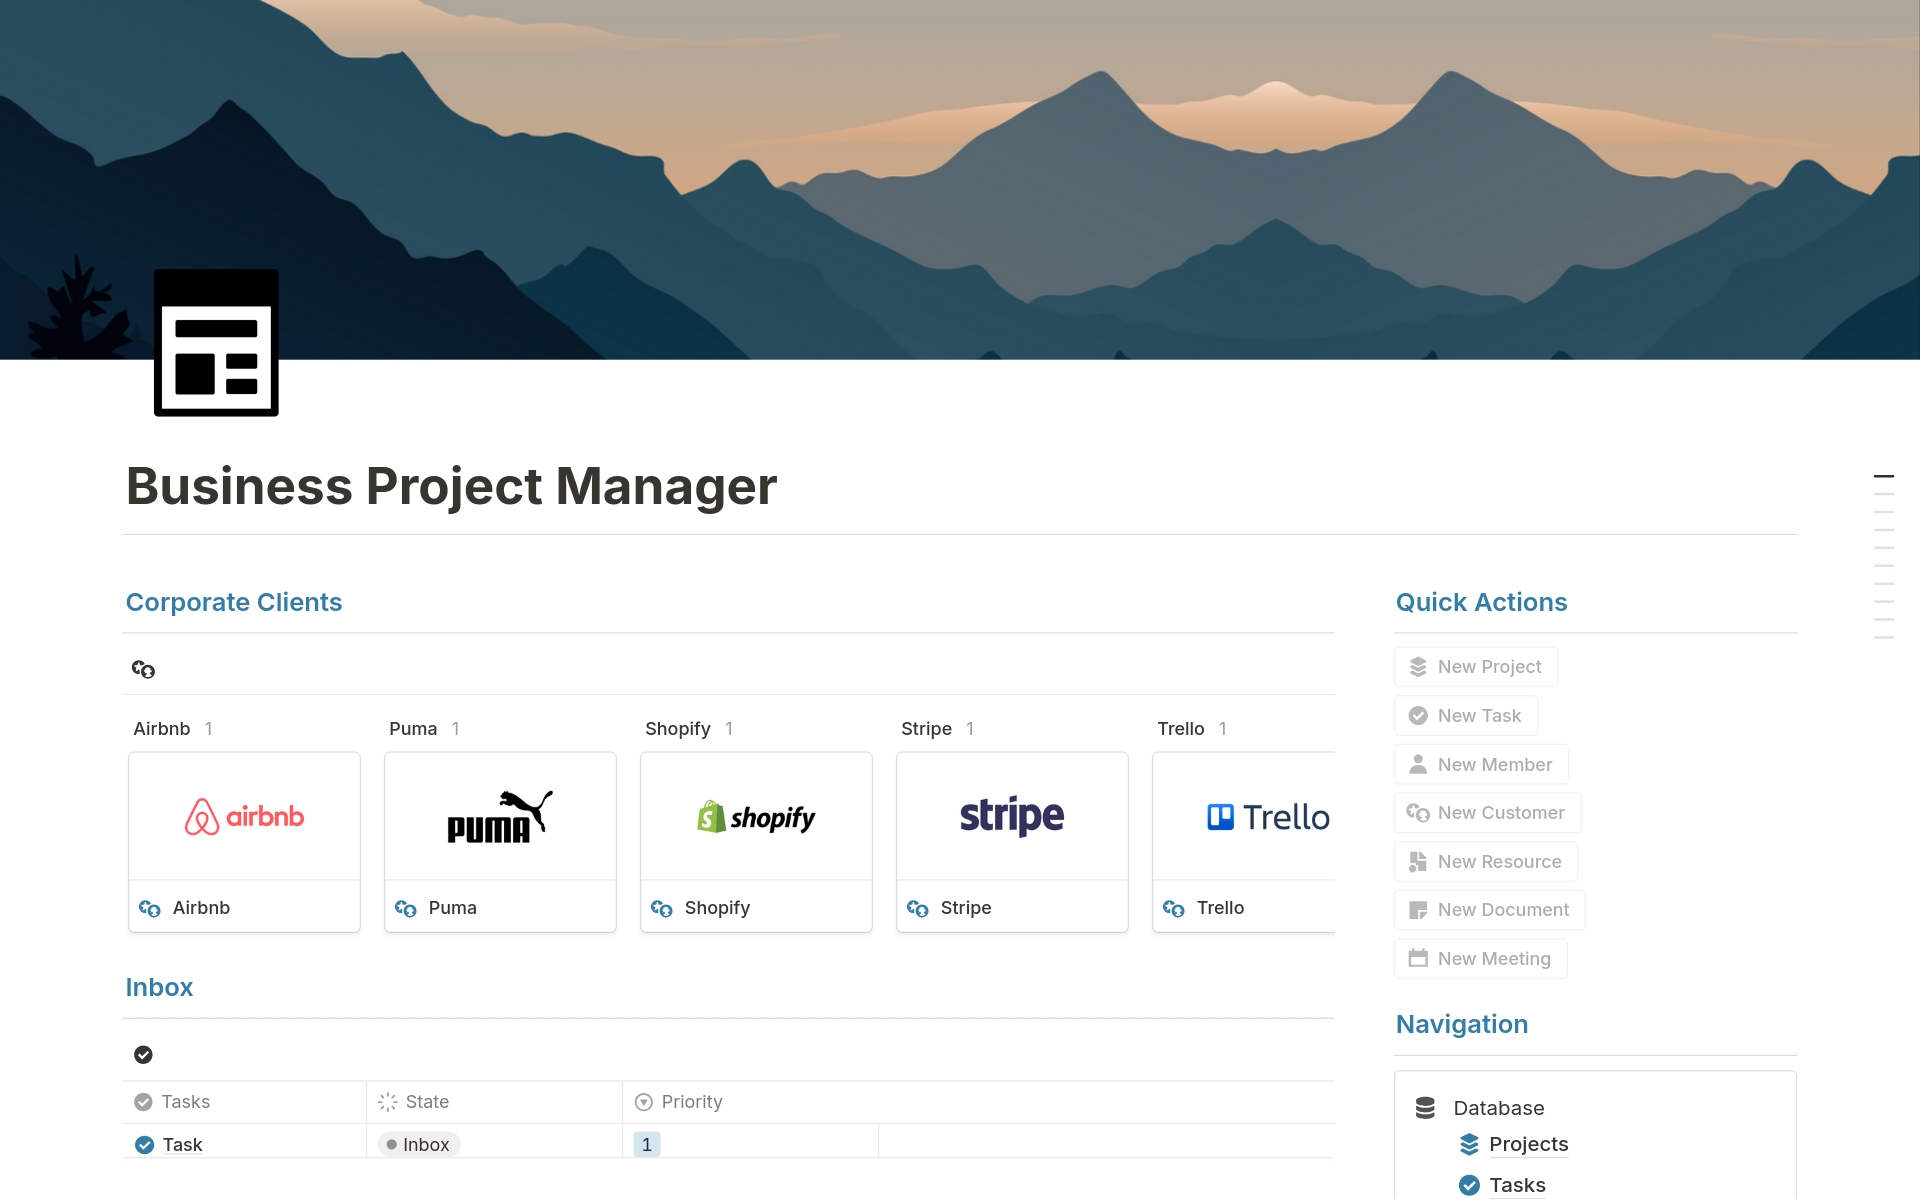 For companies that handle multiple projects simultaneously, having a robust project management system is crucial. Our Enterprise Project Manager template at Notion allows you to coordinate complex projects, optimize resources and maximize results.